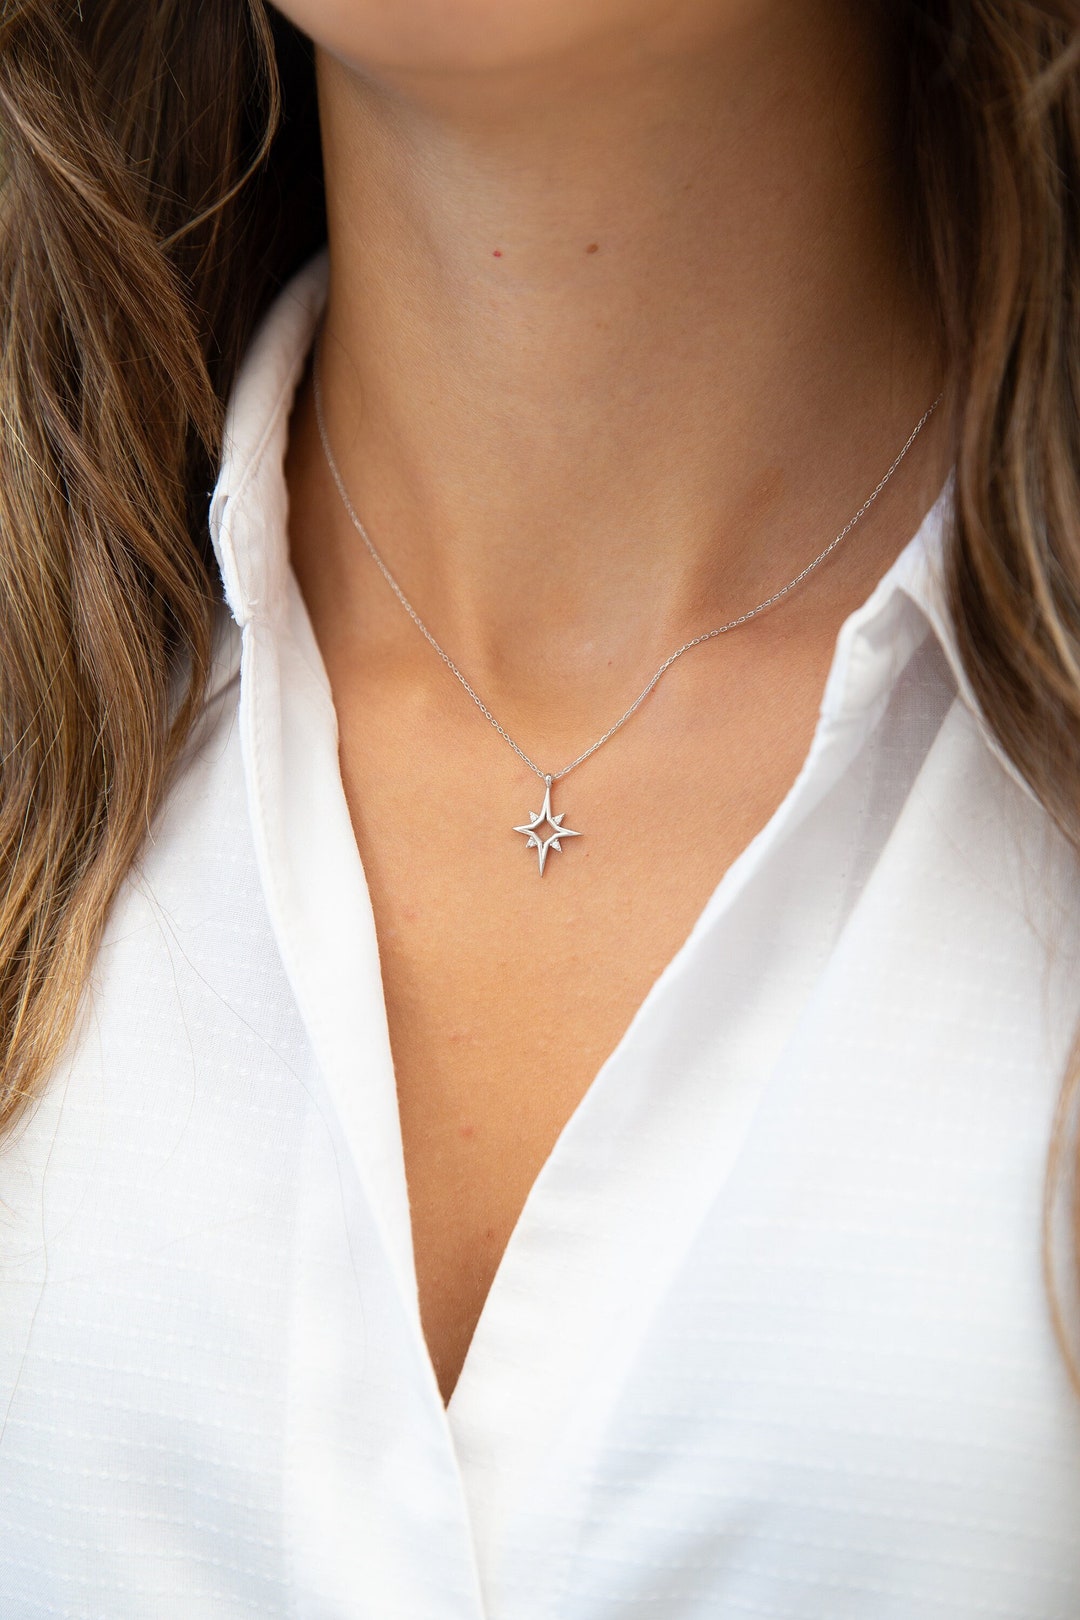 North Star Necklace North Star Pendant Celestial Jewelry - Etsy